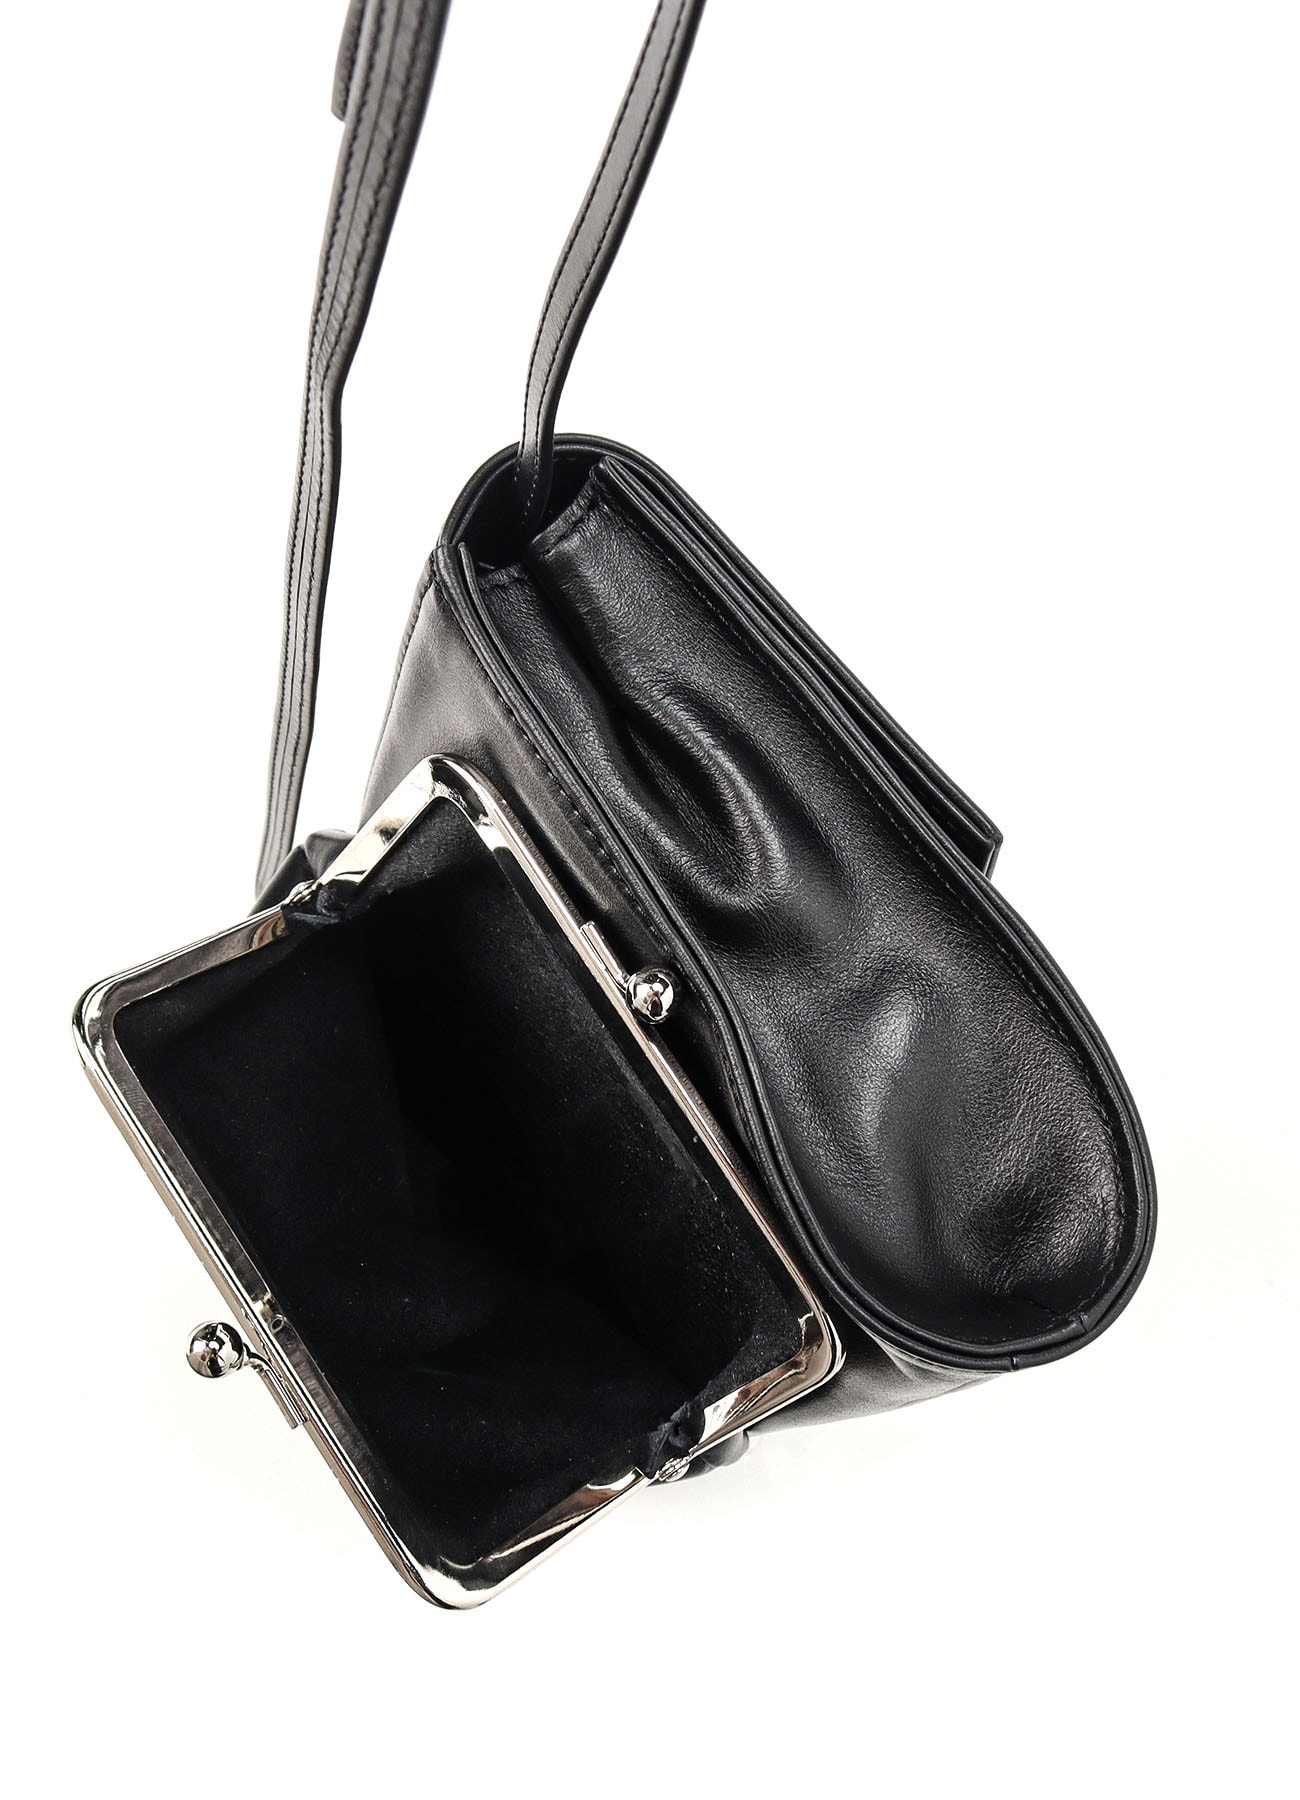 【8/7 12:00 Release】COW LEATHER CLUTCH BAG WITH CLASP